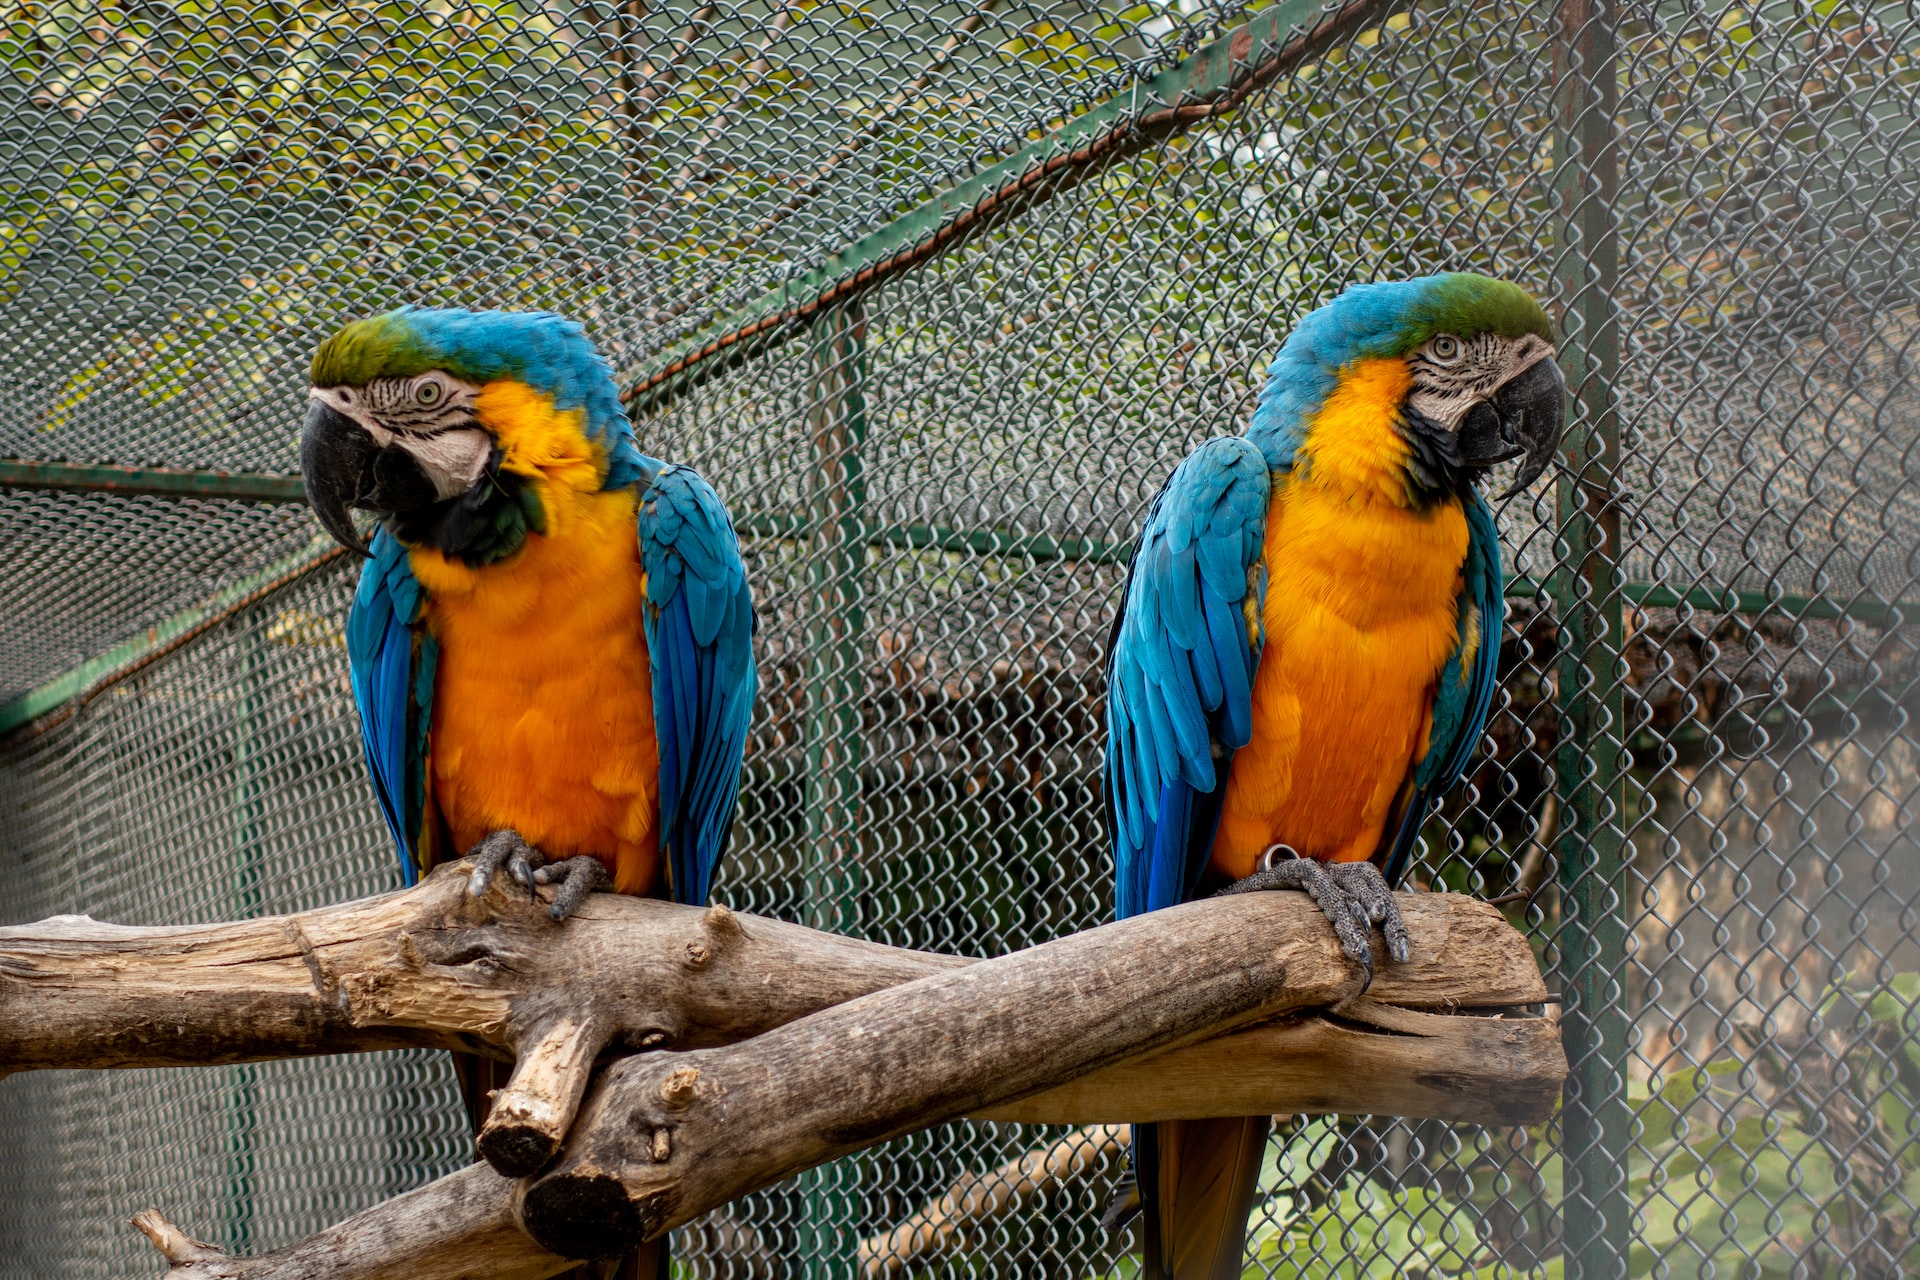 photo shows two macaws on the same perch but with a space between them, and looking away from one another.